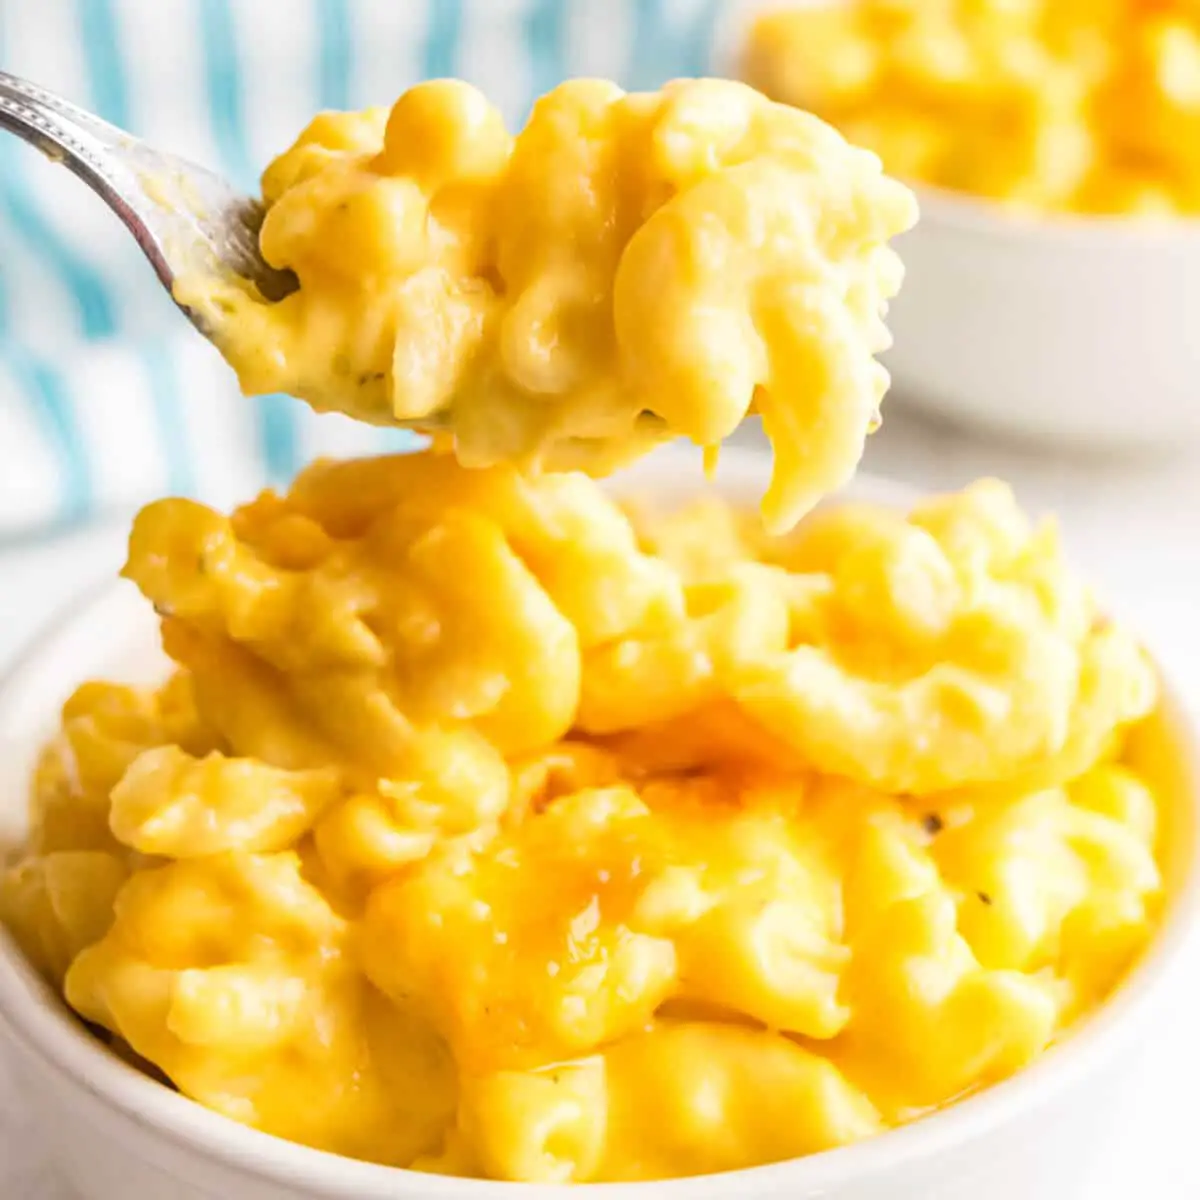 Mac and Cheese with a Creamy Cheese Sauce is The Best!